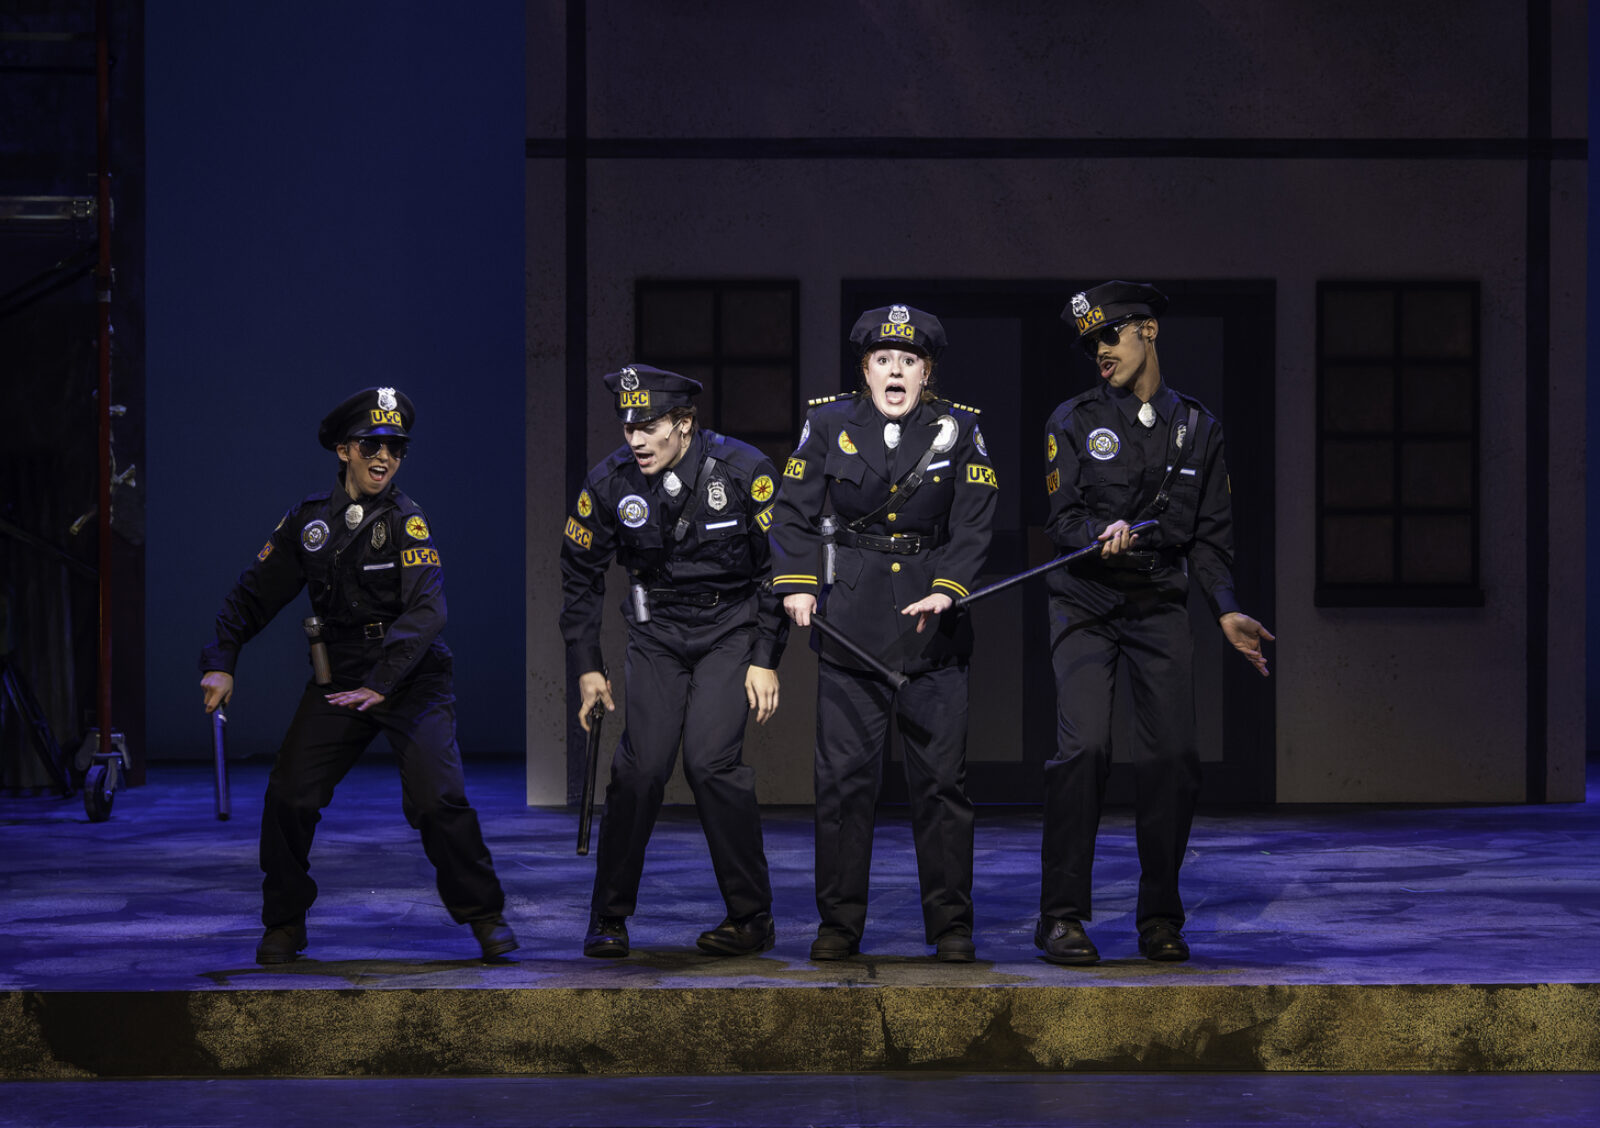 4 actors on stage in police costumes